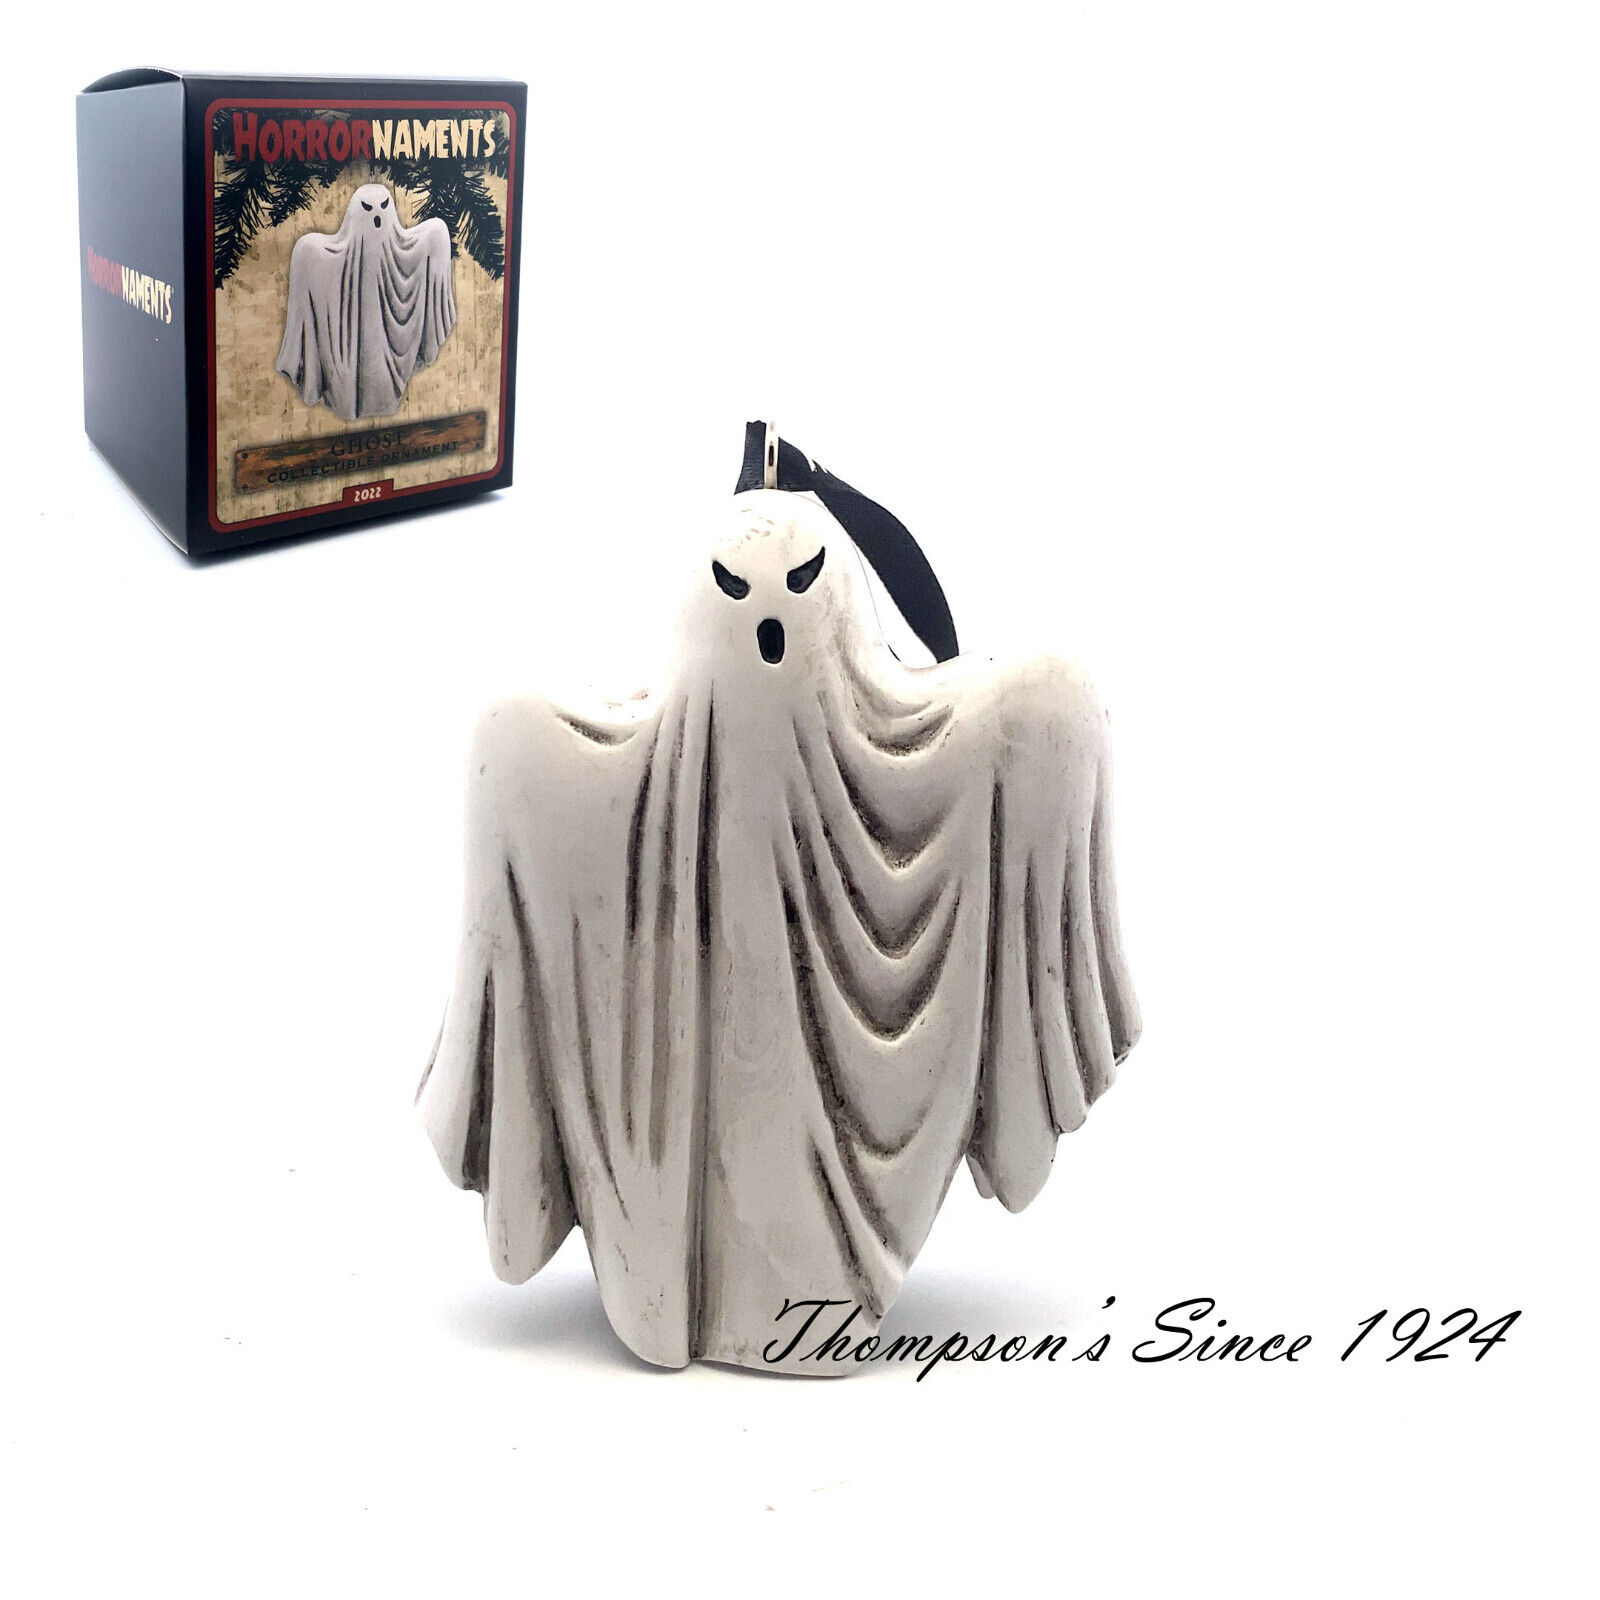 Halloween Ornaments by Horrornaments New in Box Ghost